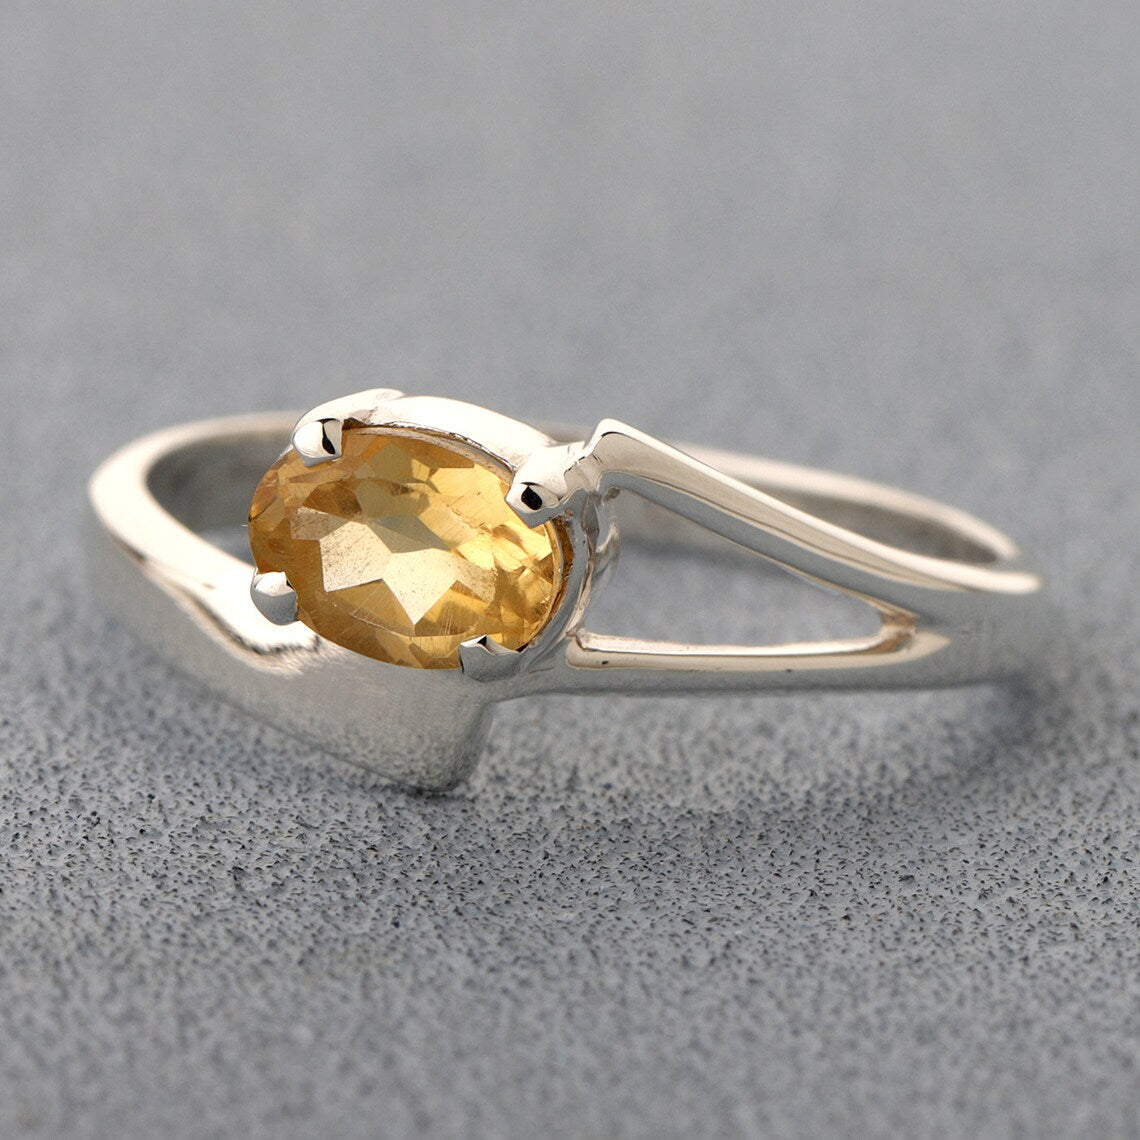 Yellow Citrine Handmade Ring in 925 Sterling Silver